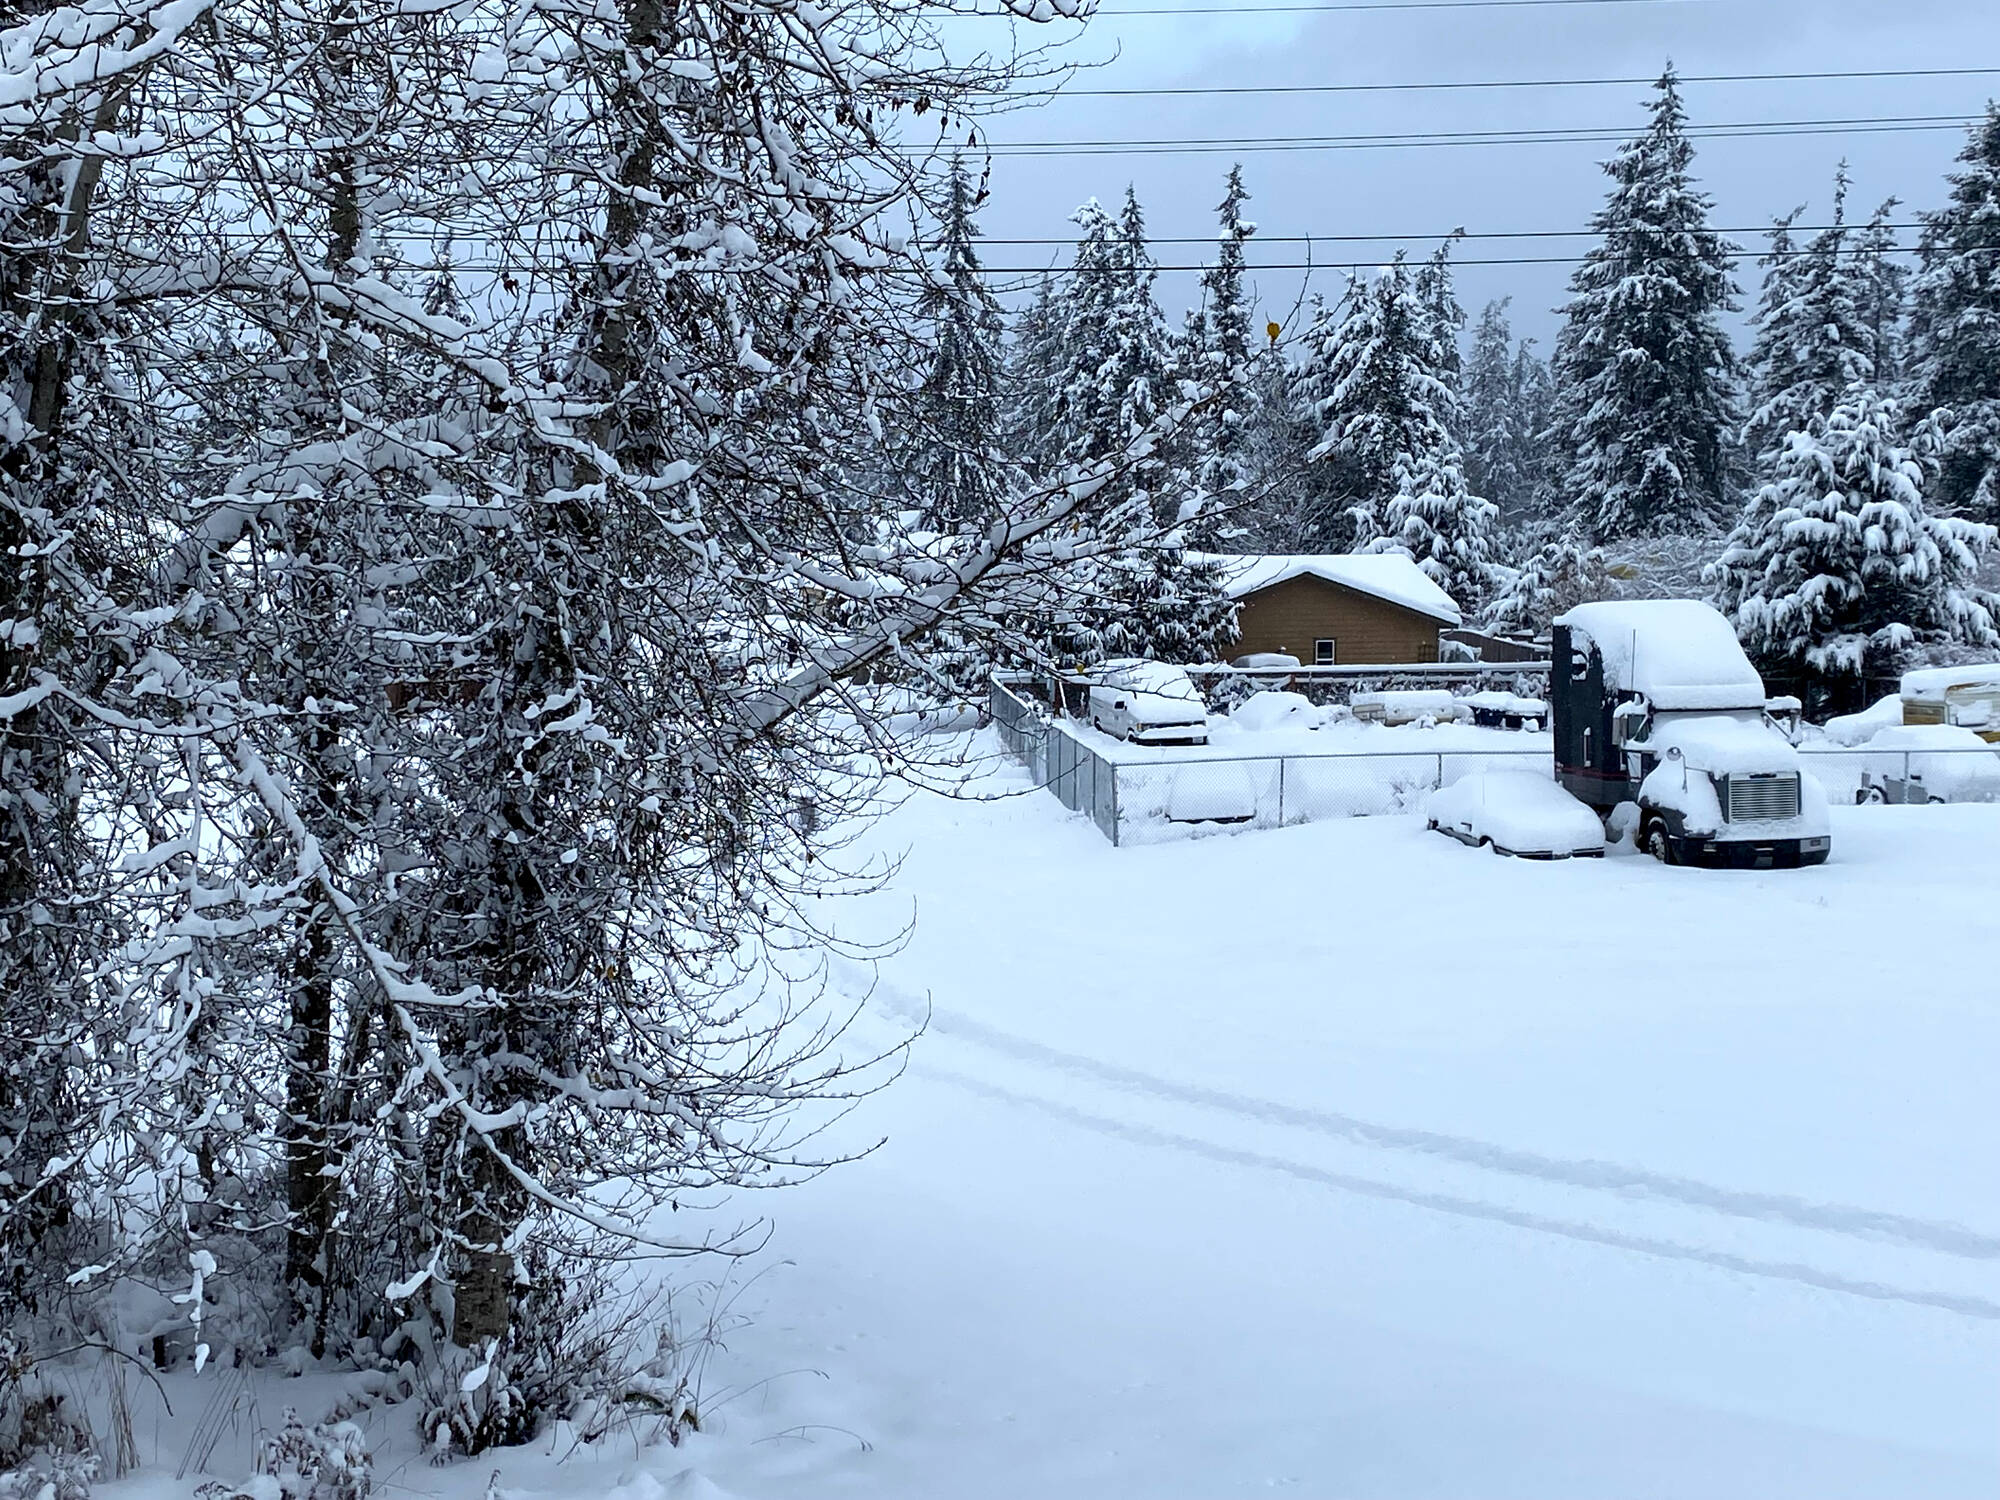 Nearly a foot of snow fell in areas of the North Olympic Peninsula, including a neighborhood near Golf Course Road in Port Angeles. (Brian McLean/Peninsula Daily News)